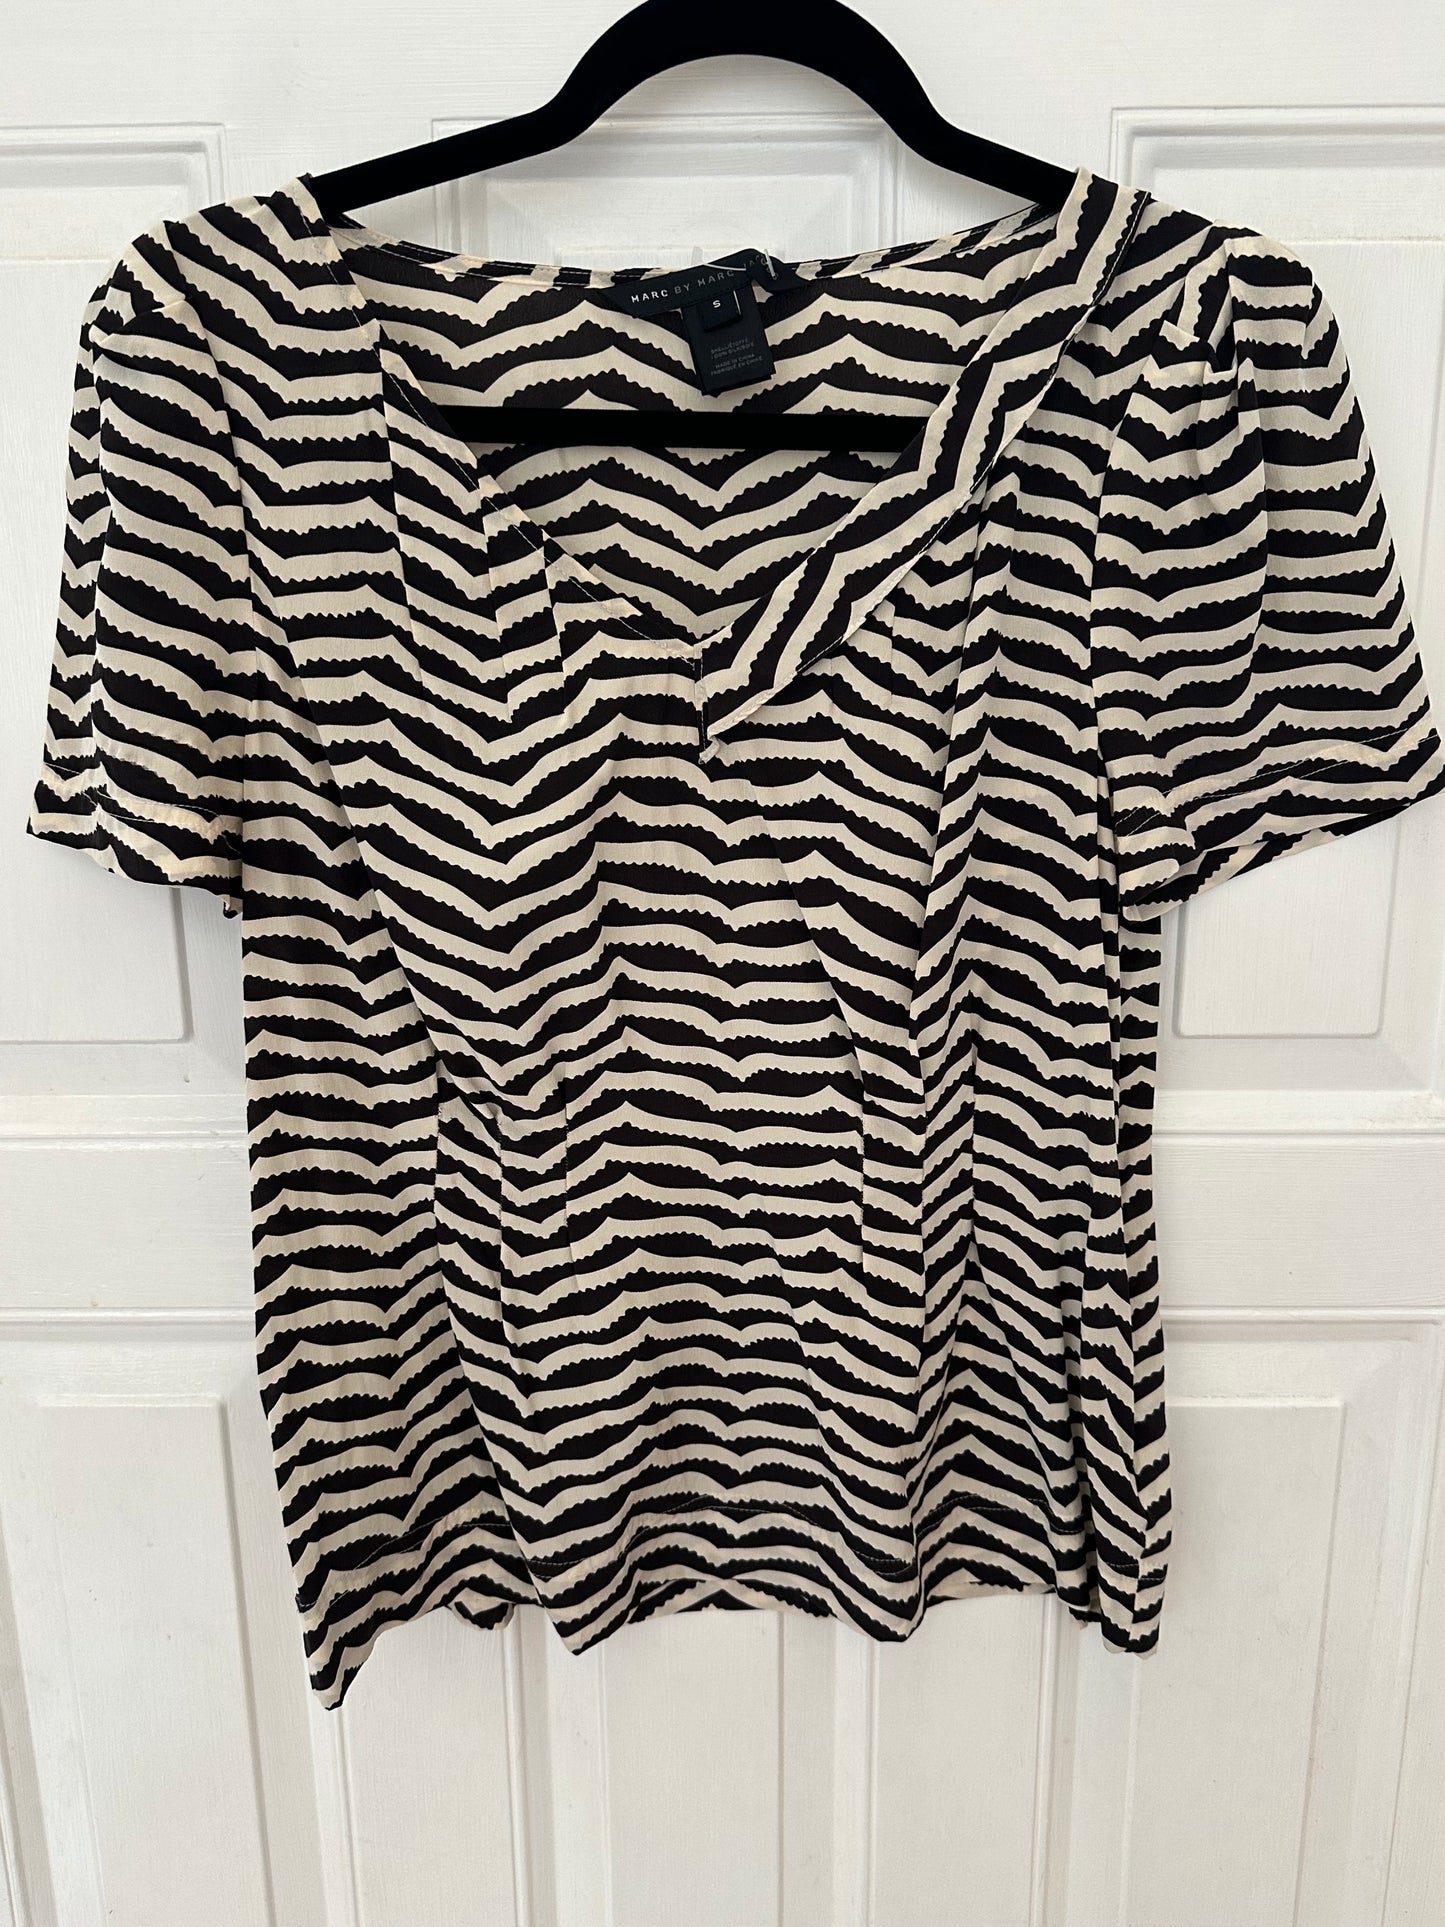 Marc by Marc Jacobs Sz Small Black and White Top